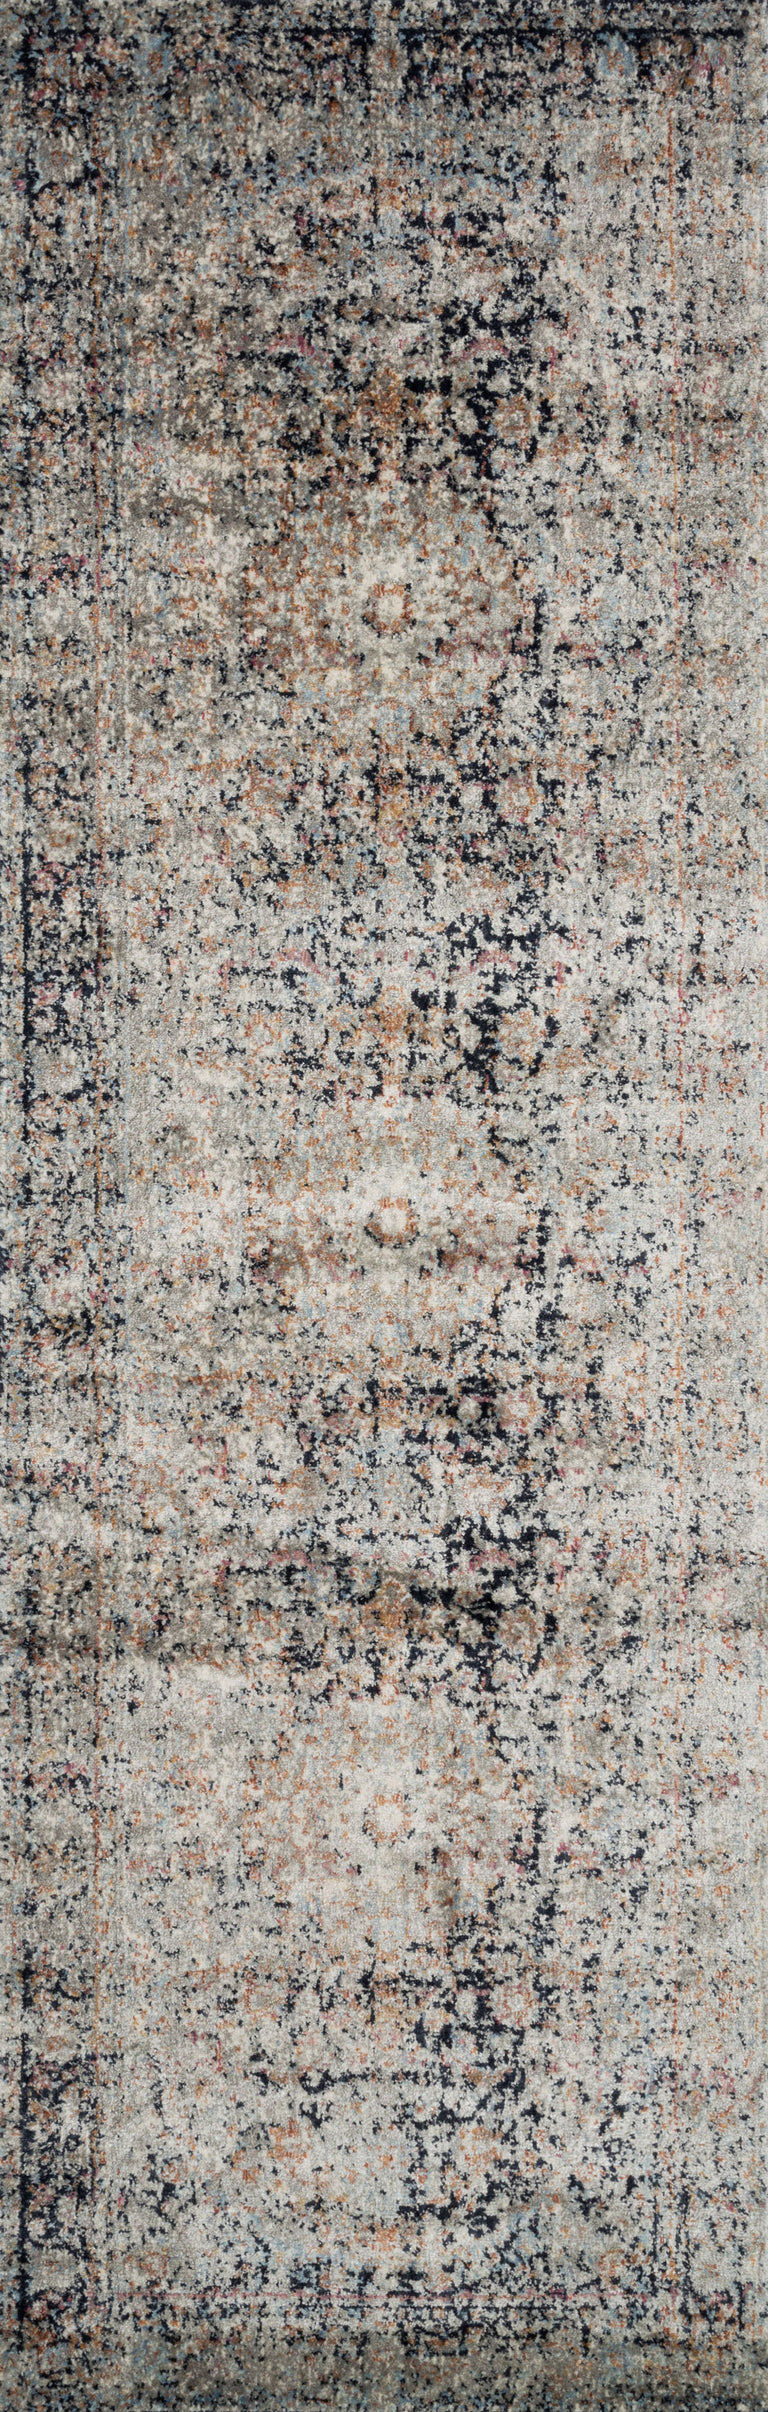 Loloi Rugs Anastasia Collection Rug in Charcoal, Sunset - 7'10" x 7'10"